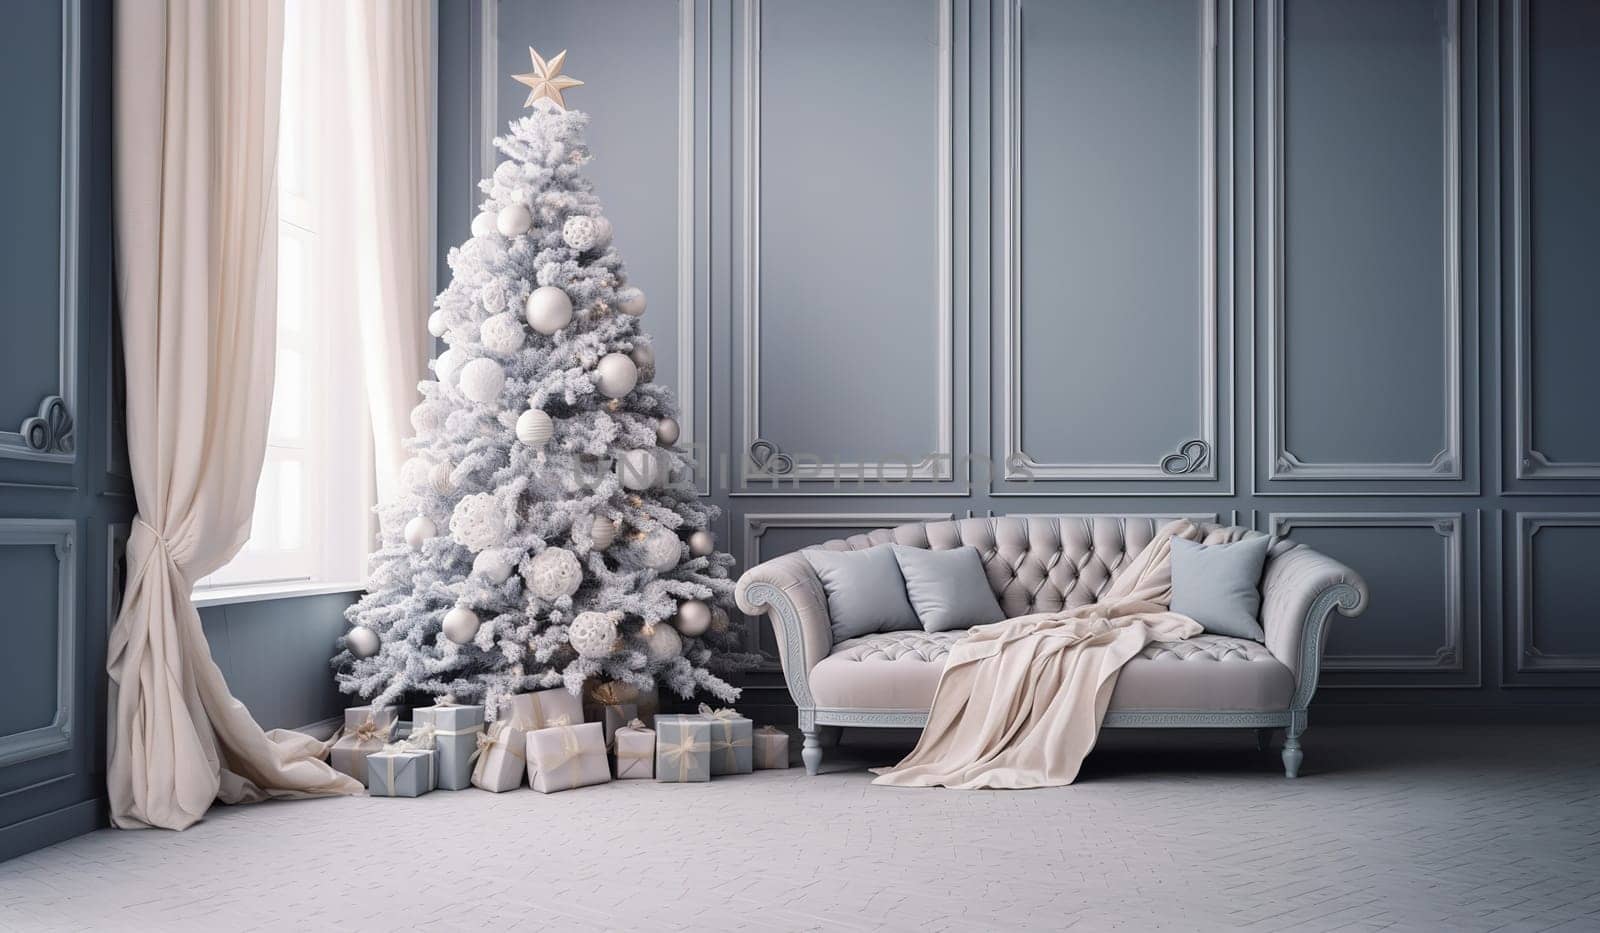 Christmas tree in minimalist trends in the color of a pastel gray-blue interior, wrapped gifts under the tree, a large cozy chair, a large luxurious window in the interior, High quality photo